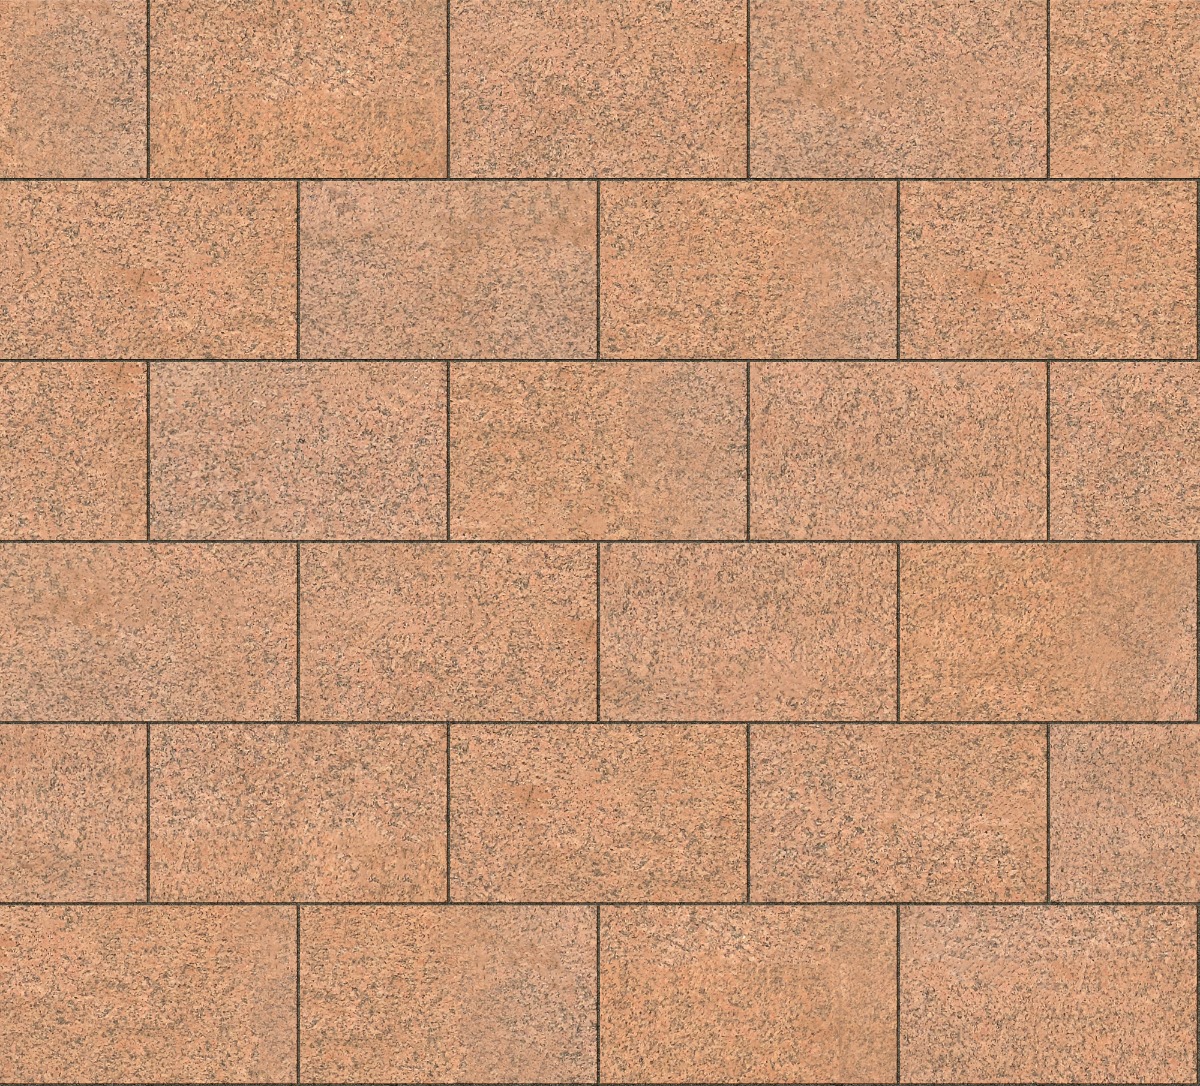 A seamless stone texture with pink granite blocks arranged in a Stretcher pattern